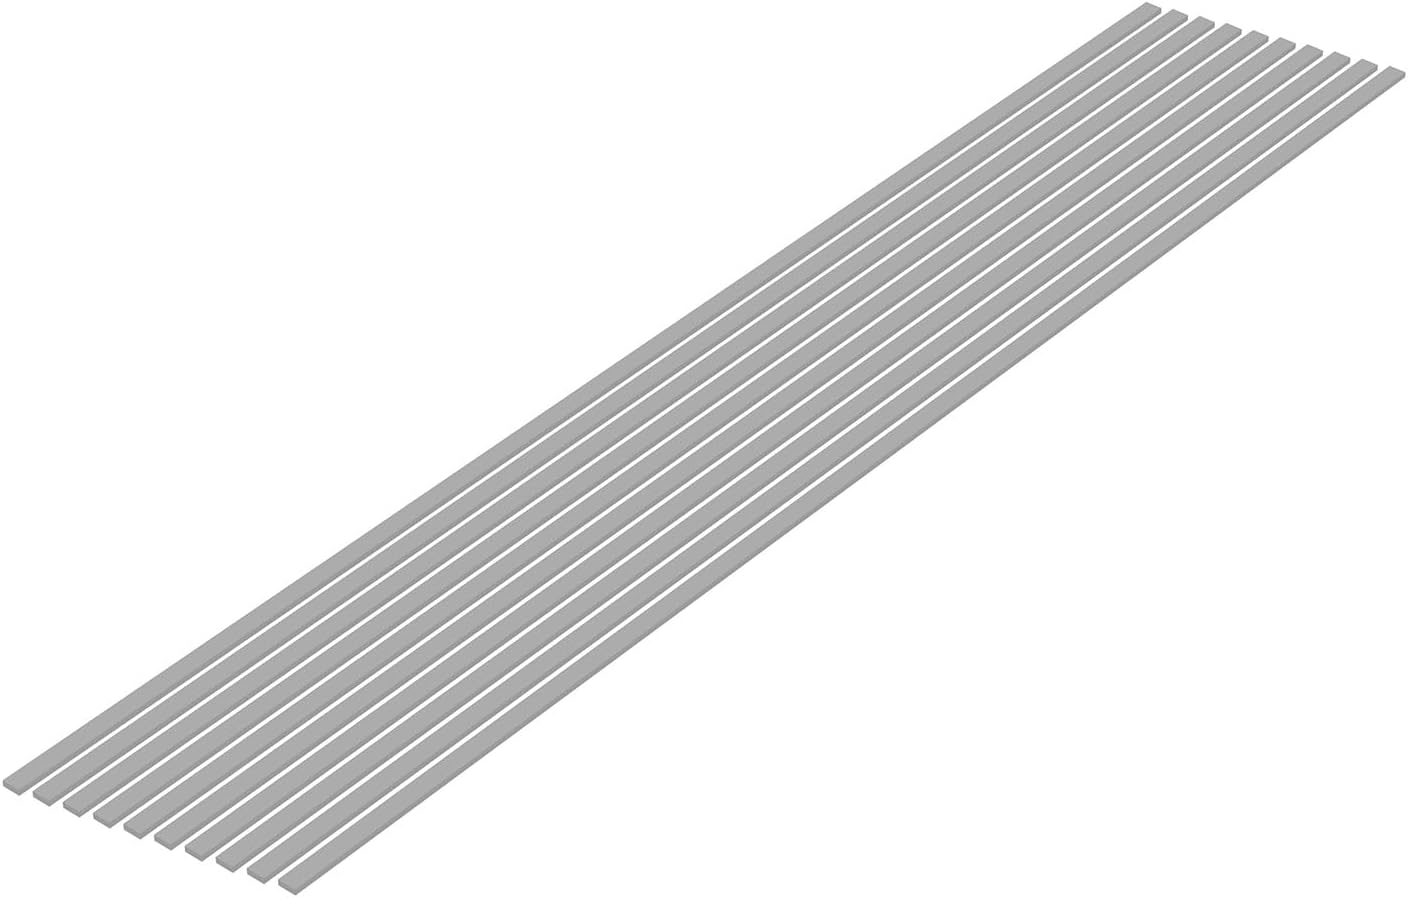 Wave Material Series OM-484 Plastic Material Gray Shredded Board 0.04 x 0.16 inches (1.0 x 4.0 mm), 10 Pieces - BanzaiHobby